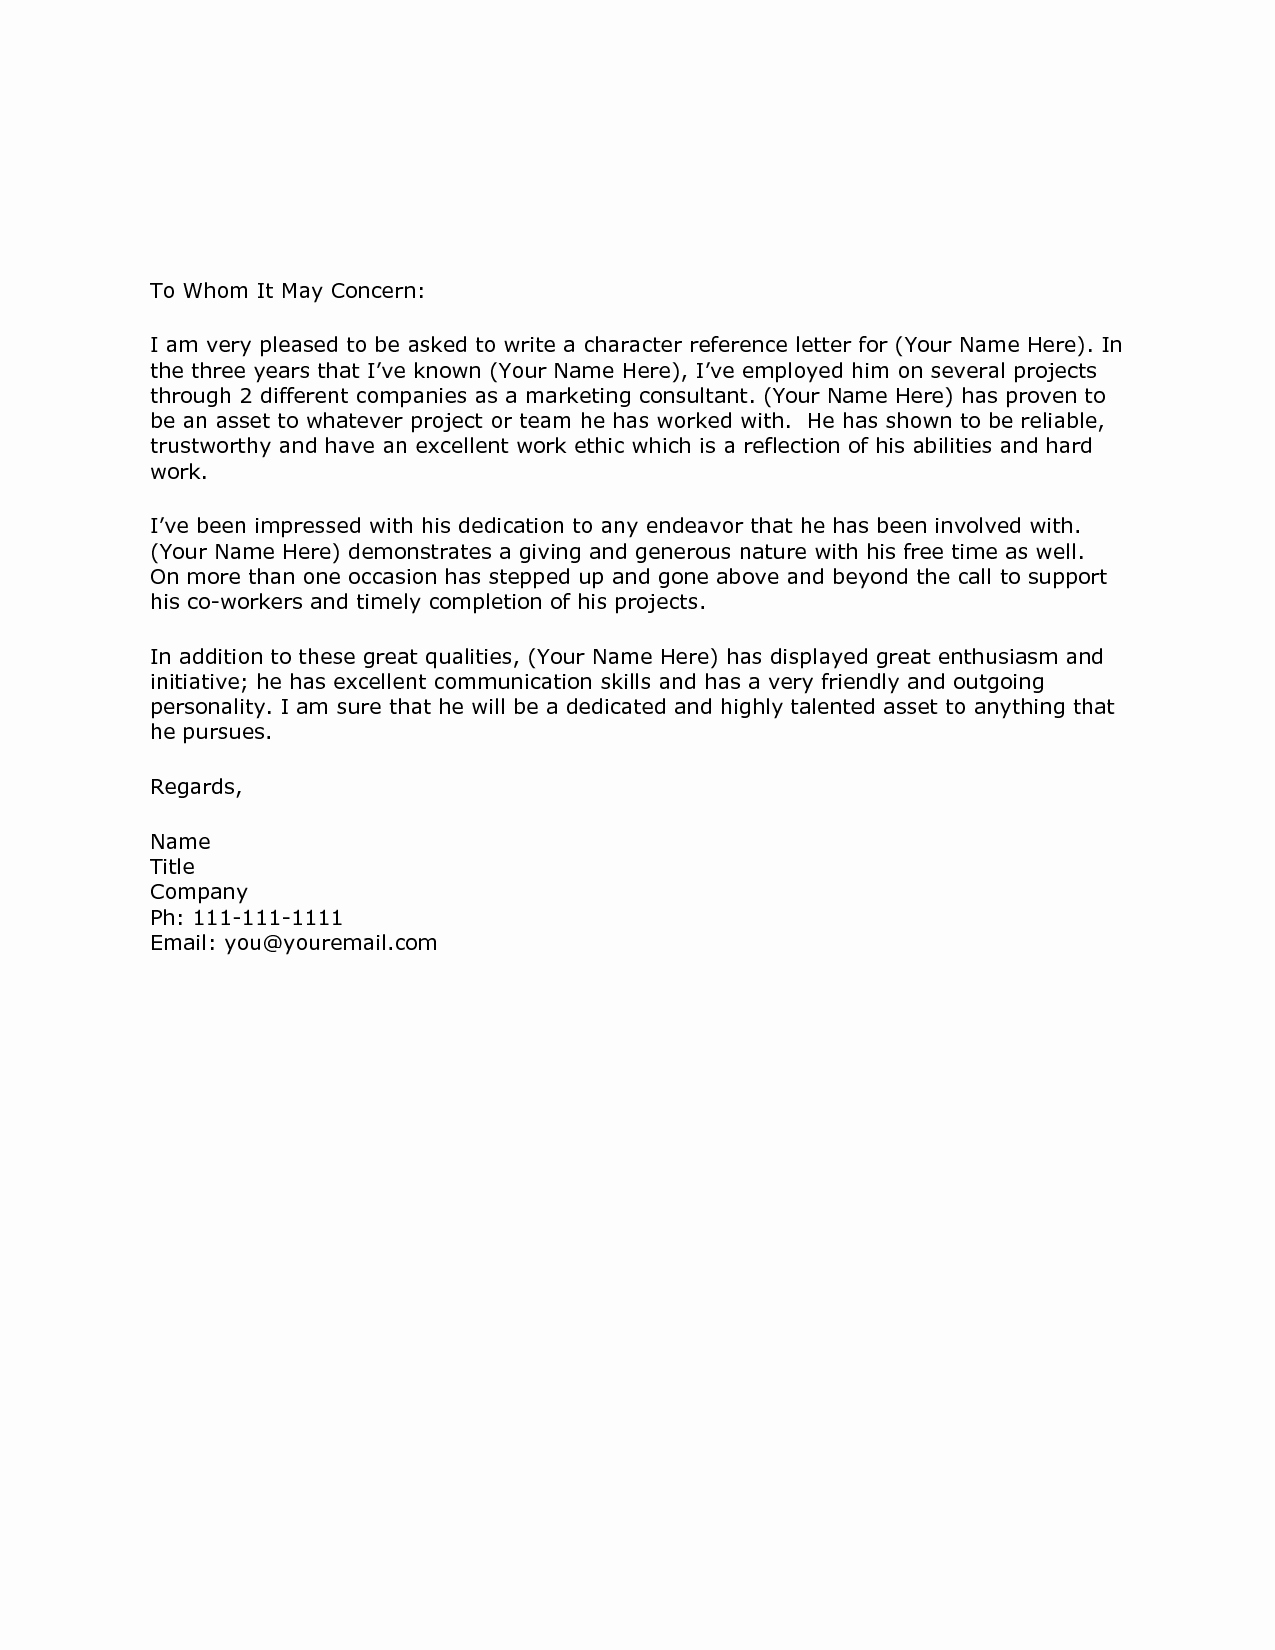 Personal Letter Of Recommendation Templates Inspirational Letter Personal Reference Letter